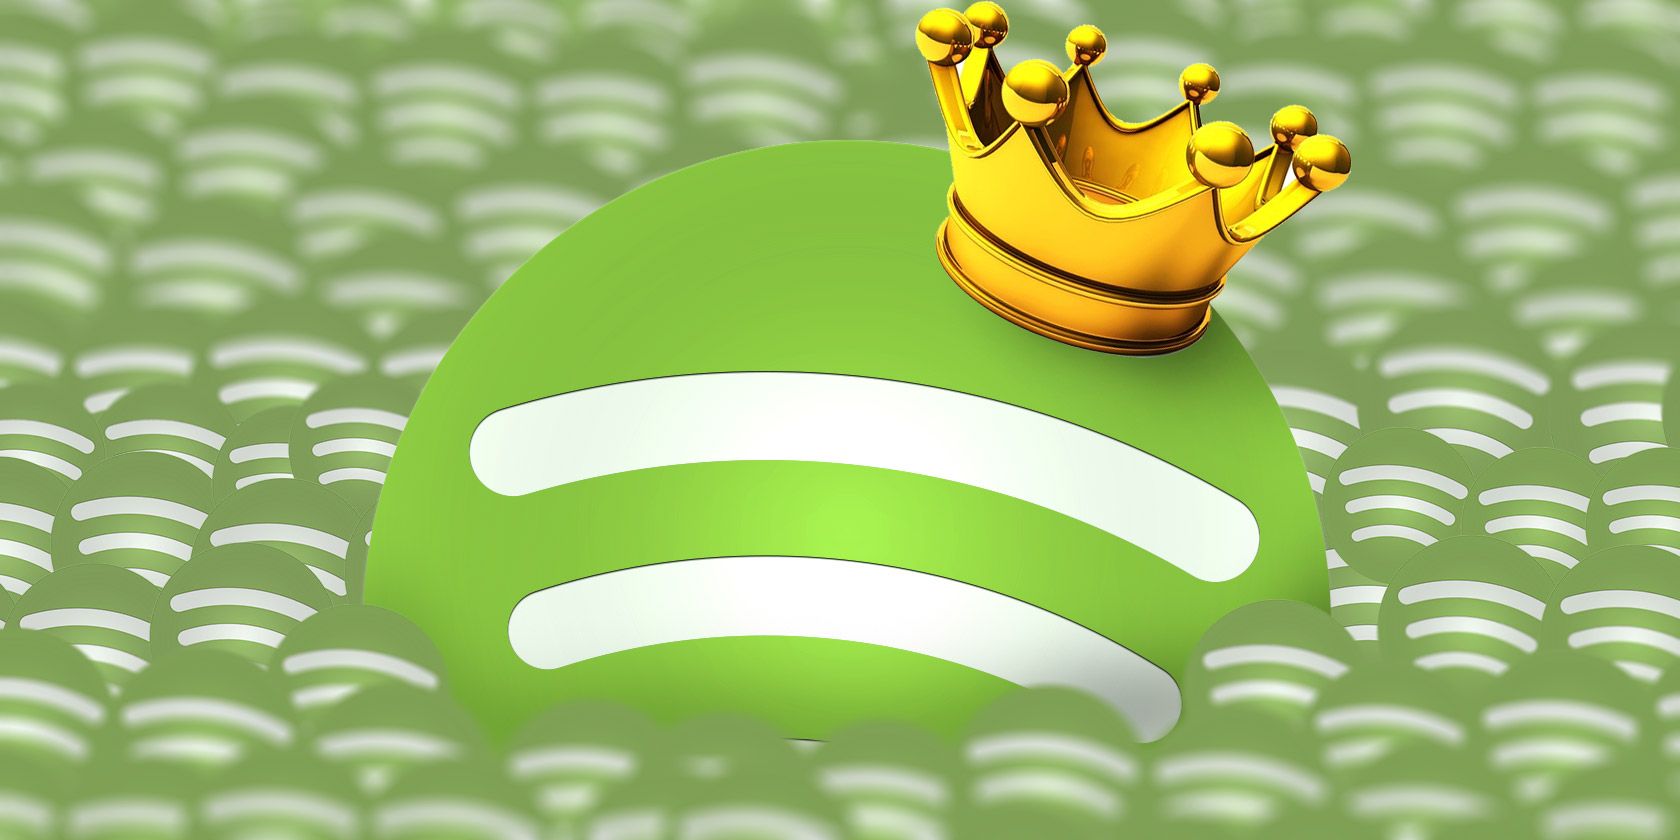 can you buy spotify premium with itunes